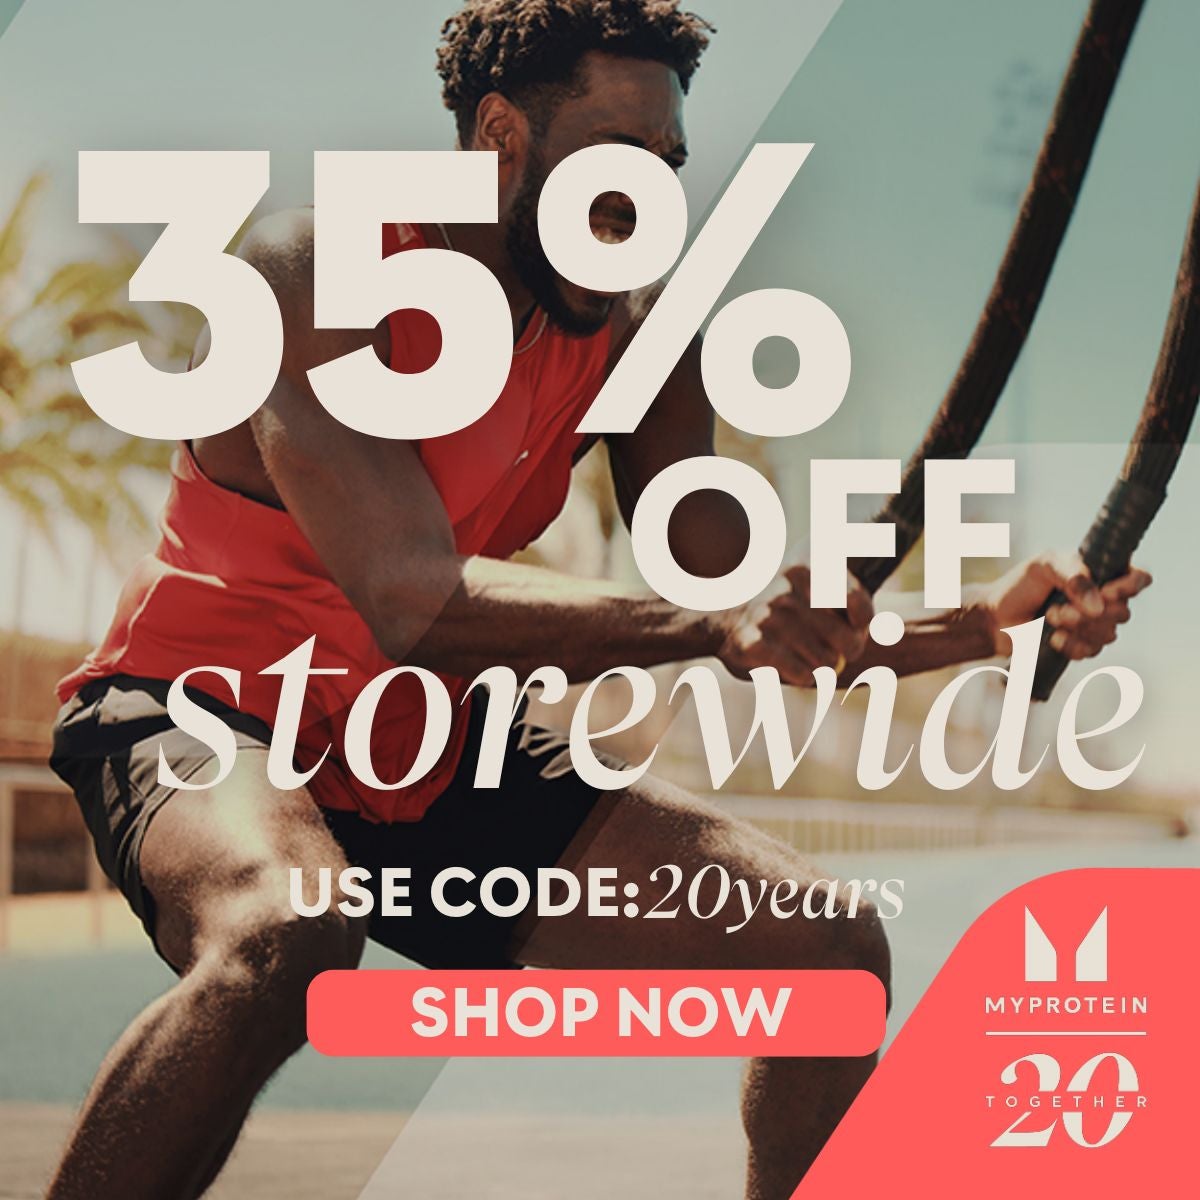 35% Off Storewide Use Code 20years